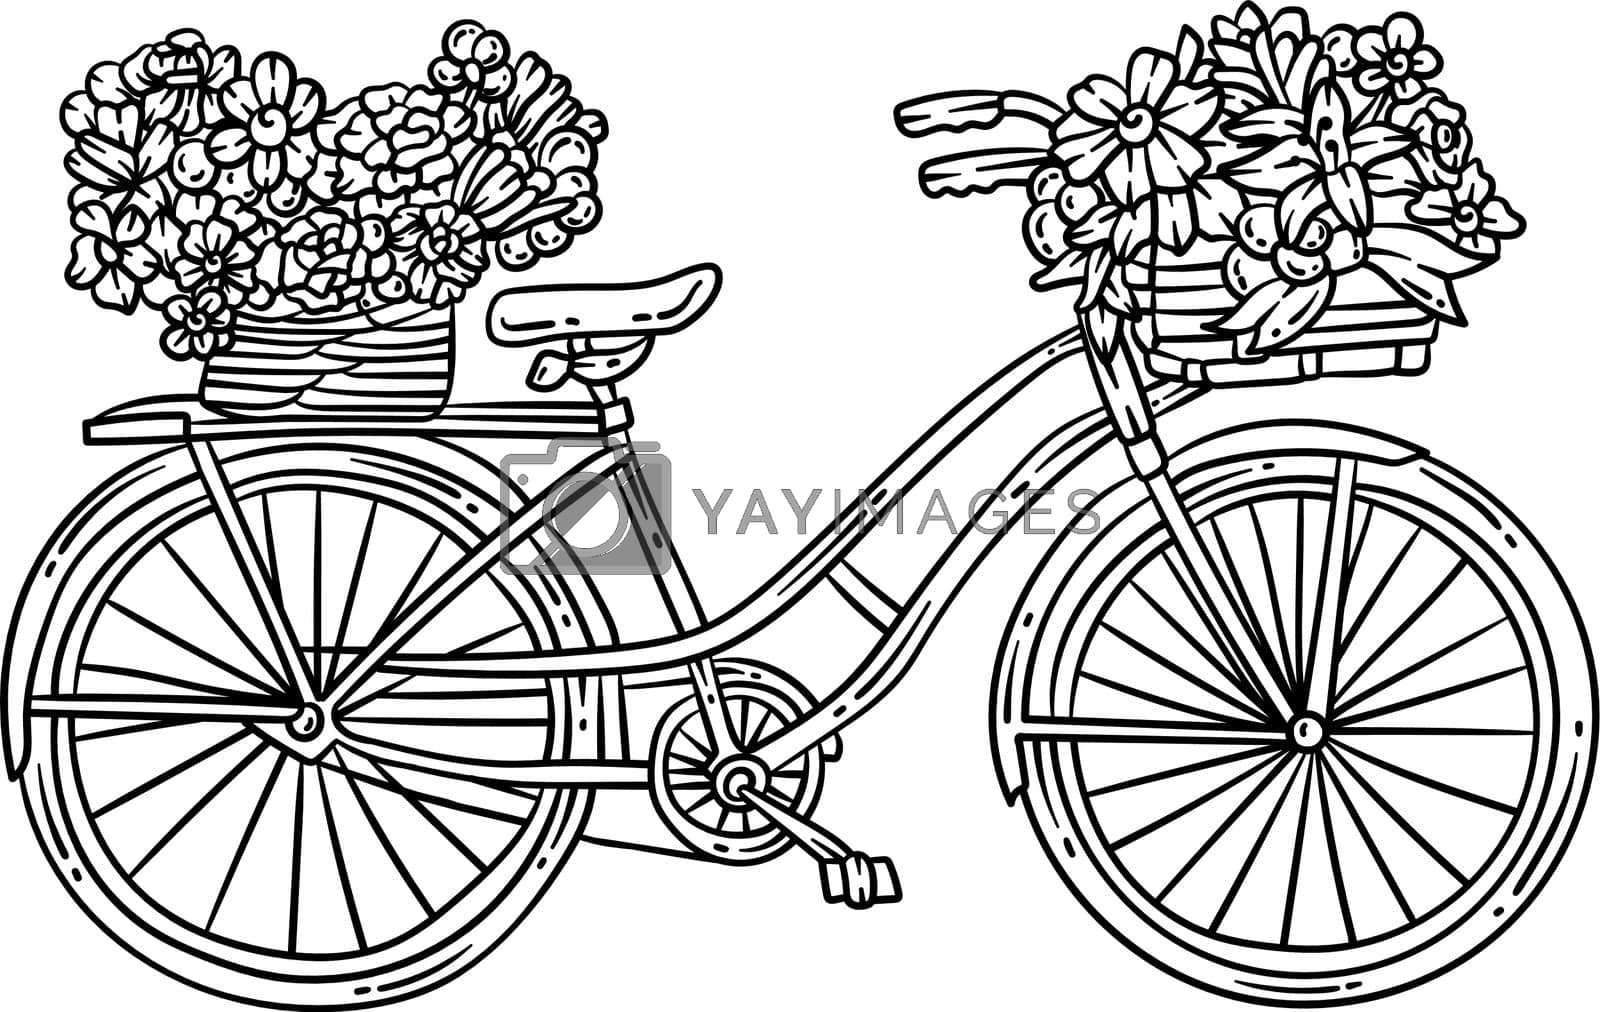 Royalty free image of Bicycle Flowers Spring Coloring Page for Adults by abbydesign